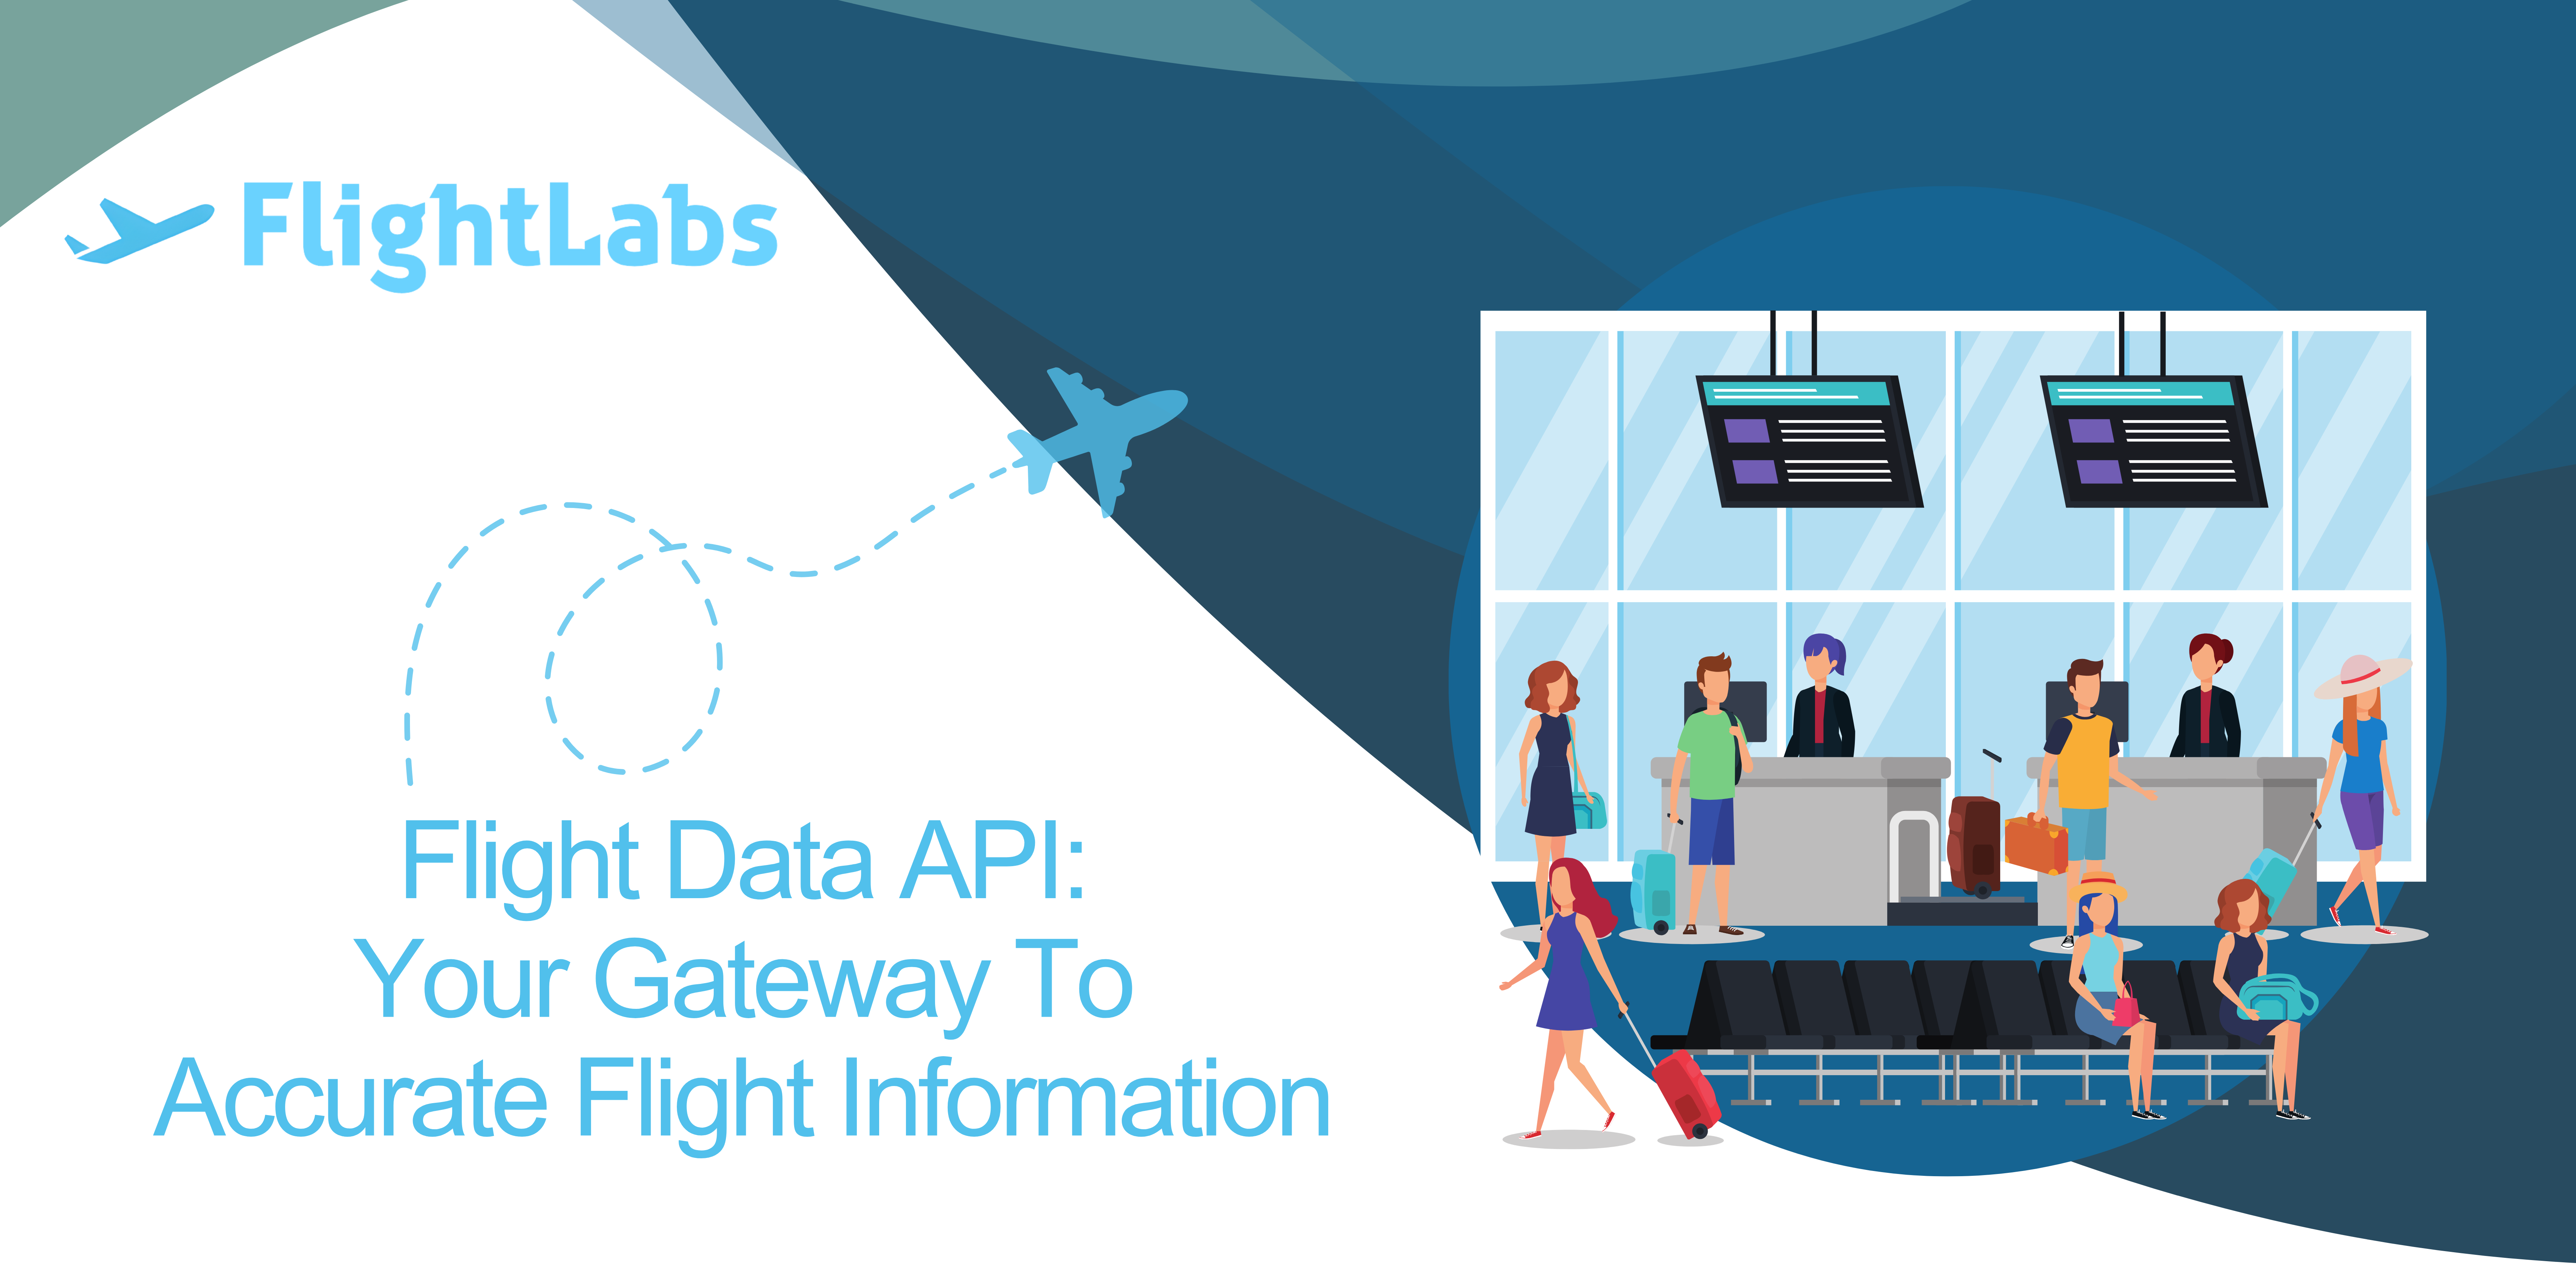 Flight Data API: Your Gateway To Accurate Flight Information